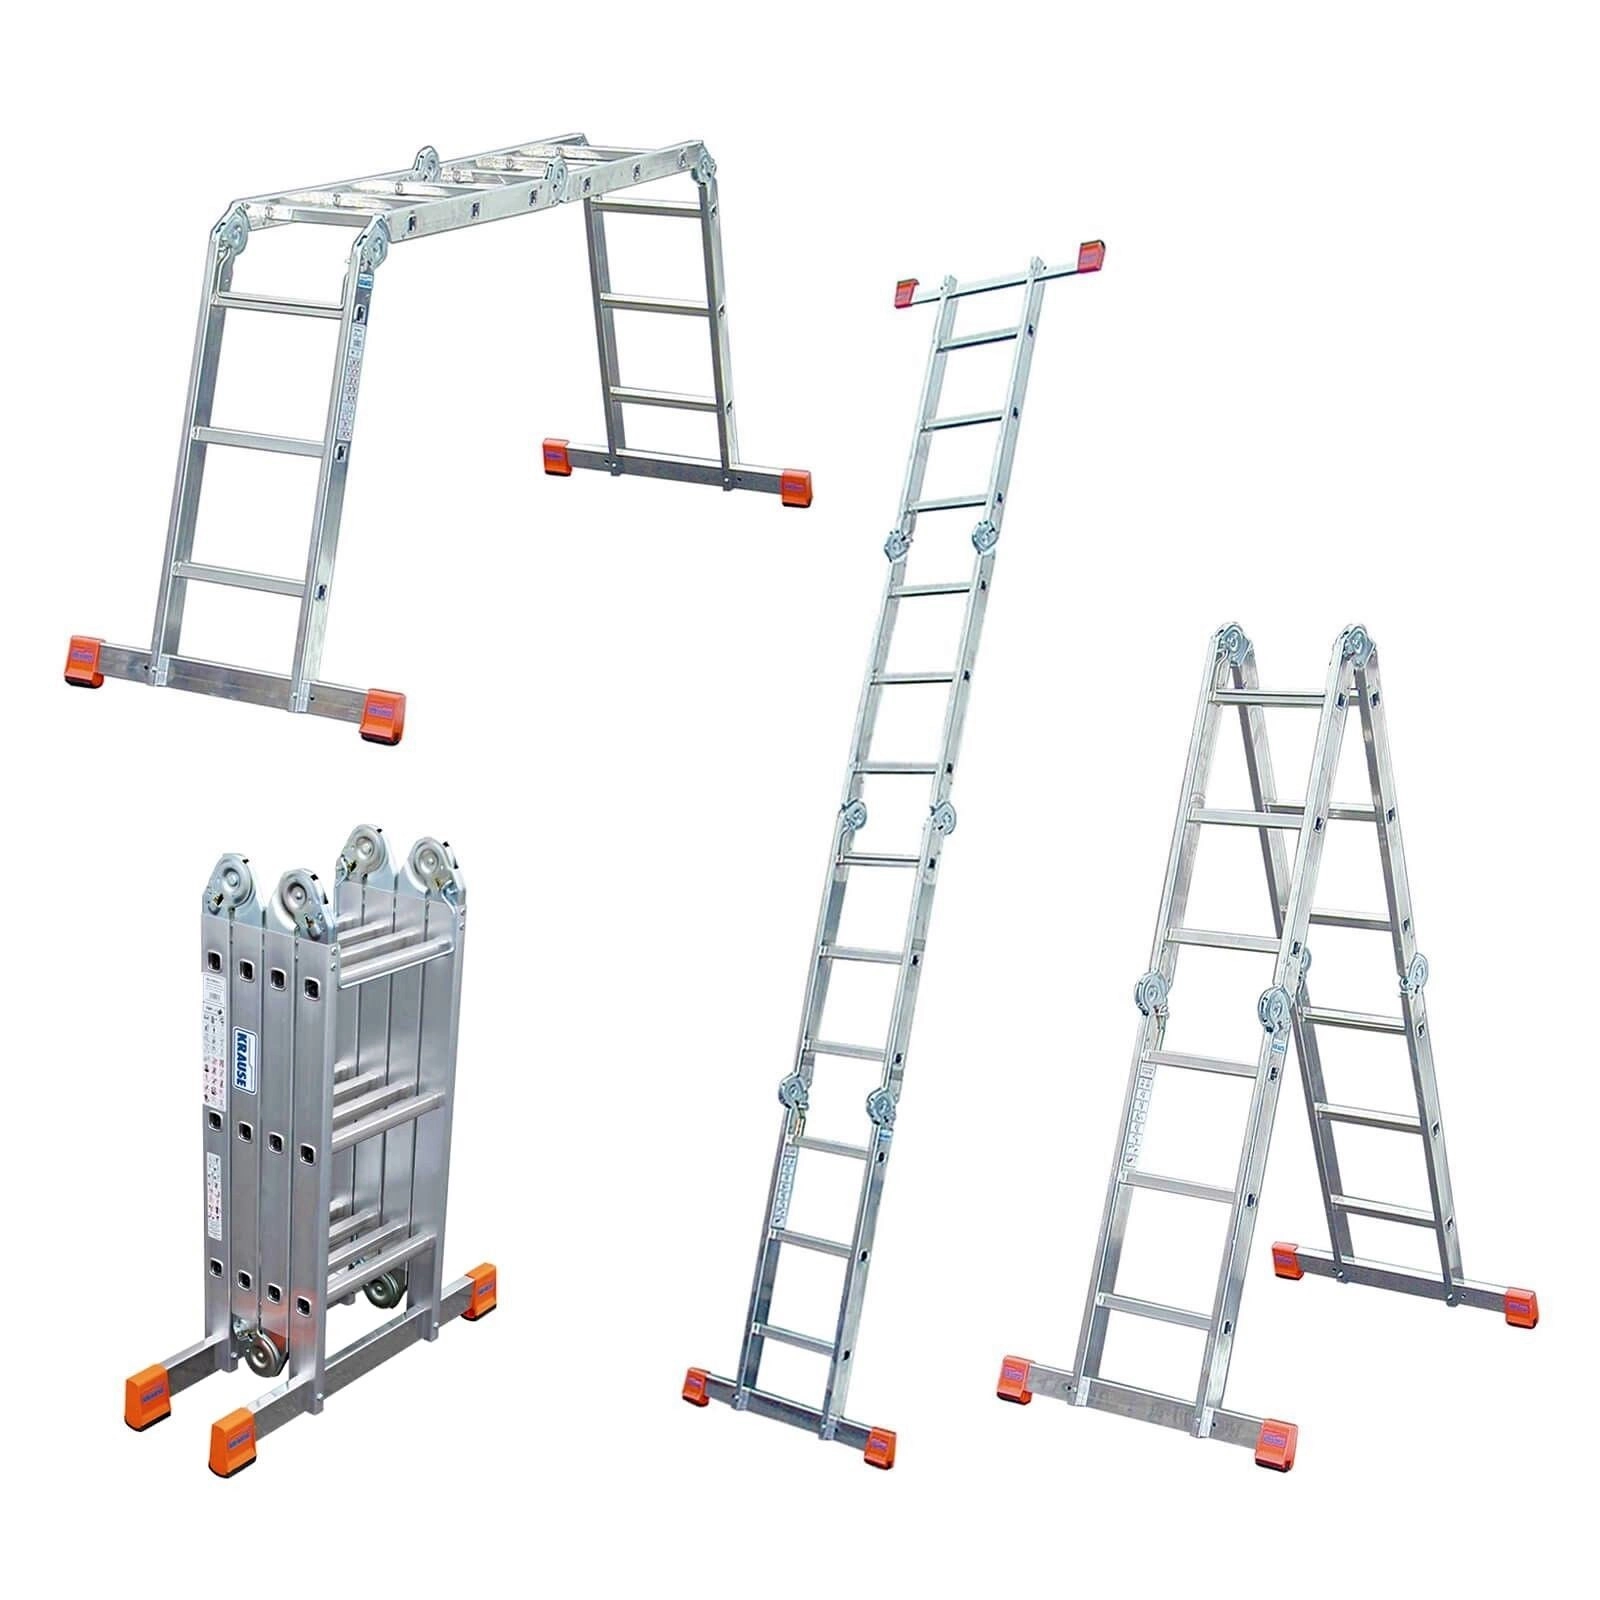 U-shaped folding ladder for rent with 3 options of use